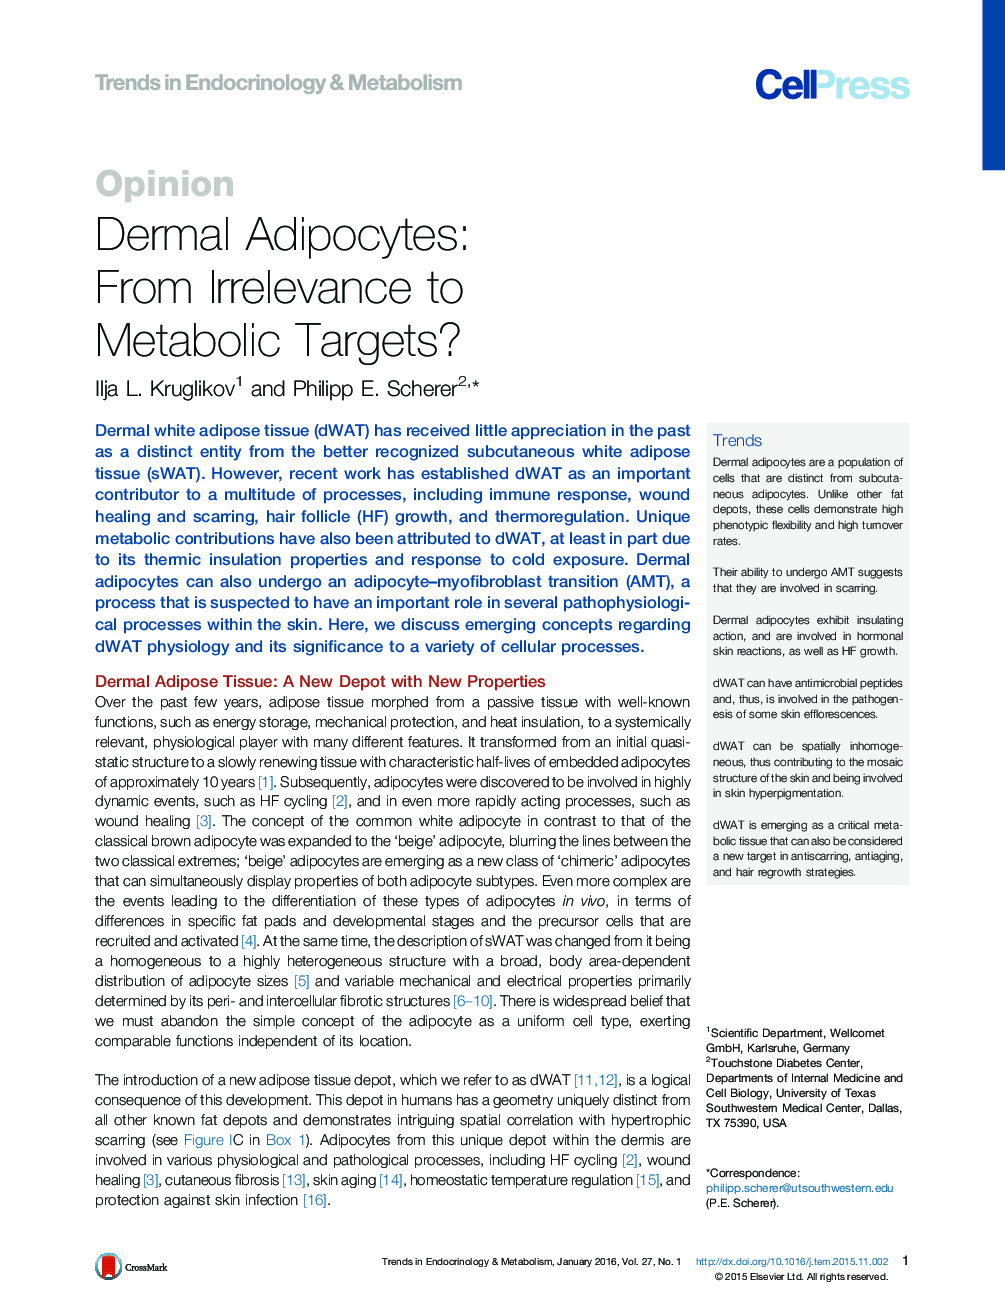 Dermal Adipocytes: From Irrelevance to Metabolic Targets?